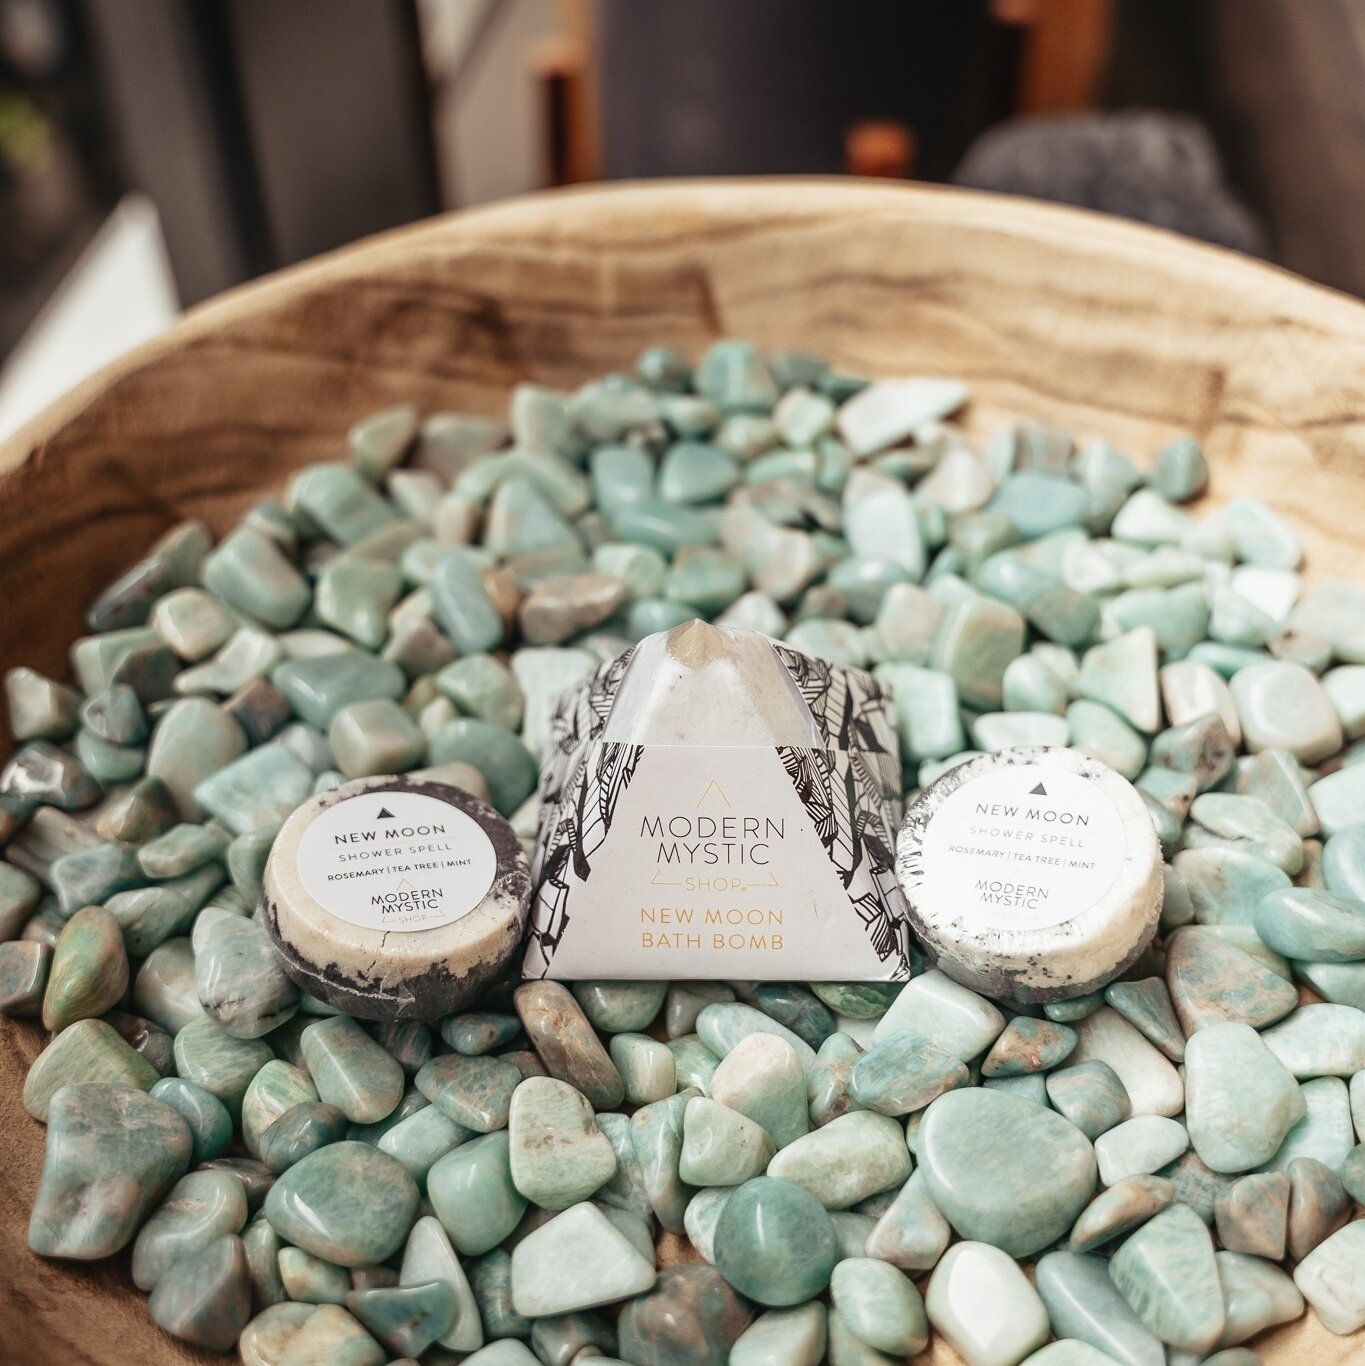 Get your hands on @modernmystic&rsquo;s newest collection. Handmade items like natural essential oils, incense, candles, and ancestral healing that promote natural healing and self-care 🔆